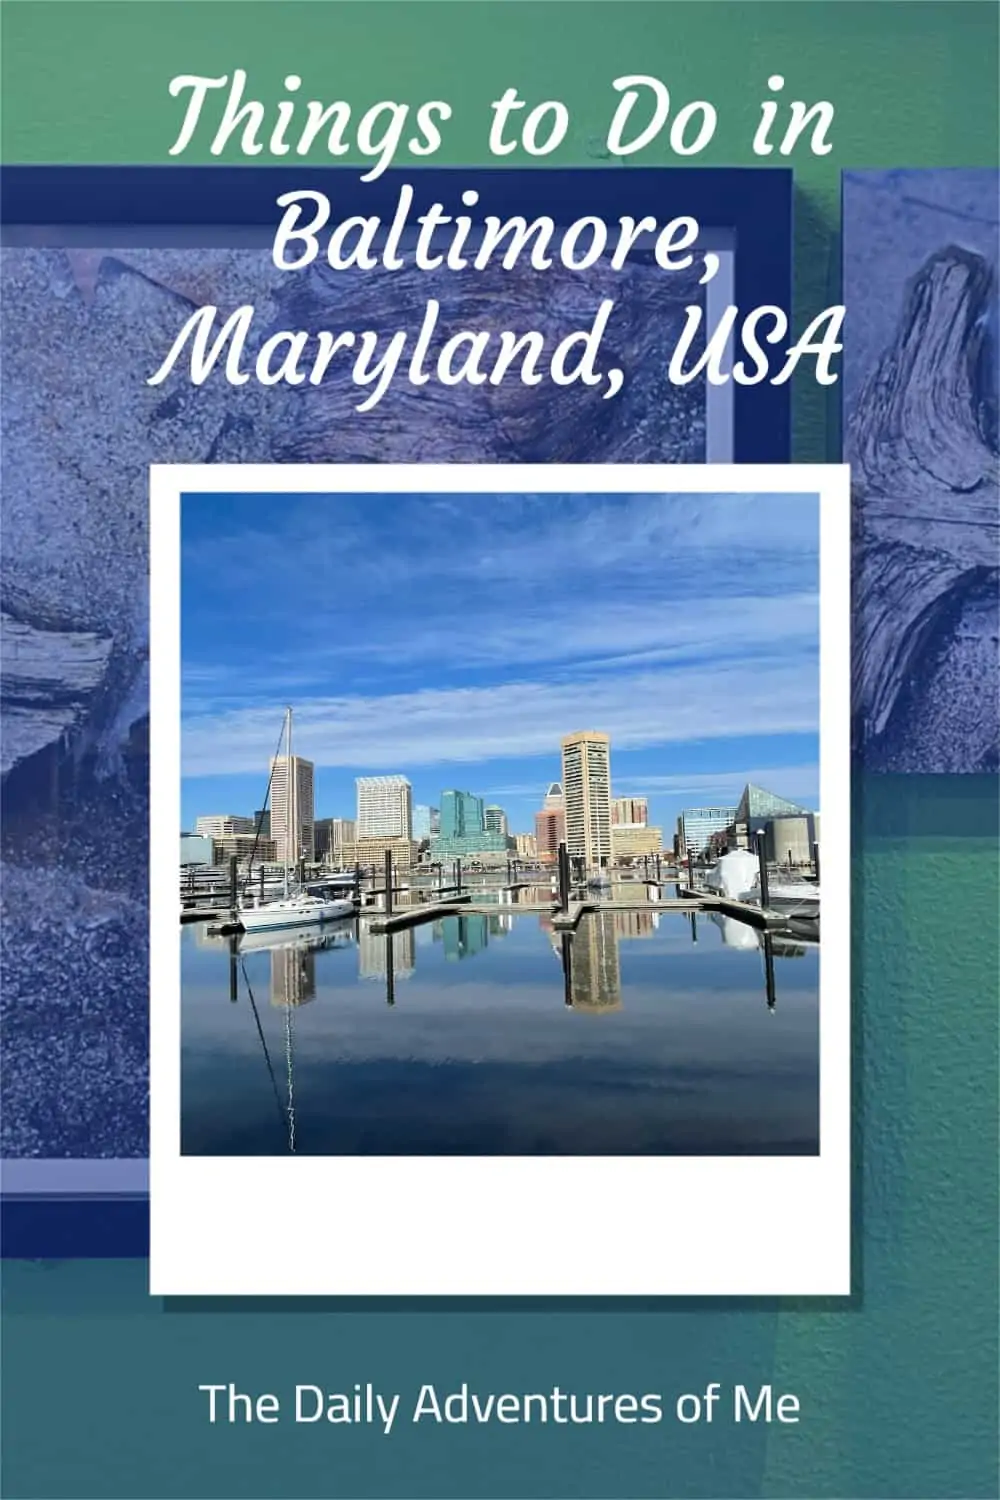 Visit this waterfront city full of museums, history and amazing seafood, along with the National Aquarium. @VisitMaryland #Baltimore #thingstodoinBaltimore